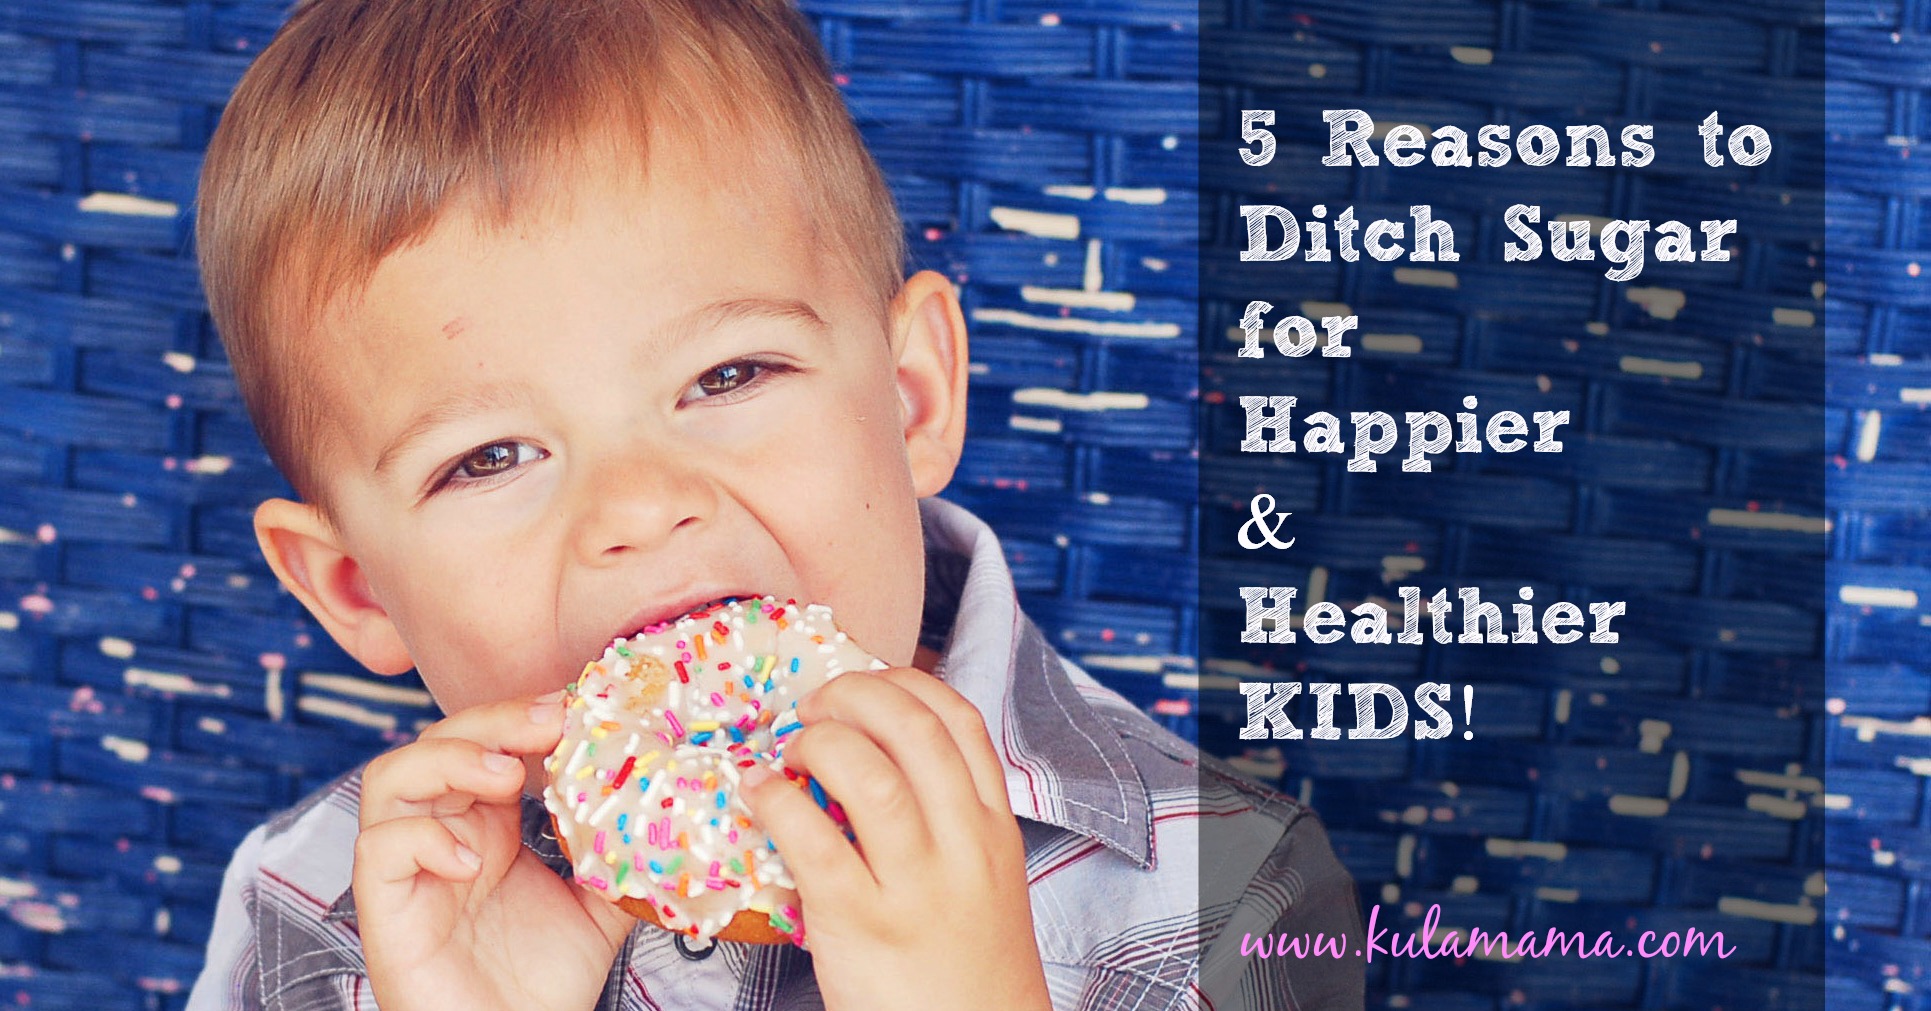 5 Reasons to Ditch Sugar for Happier and Healthier Kids